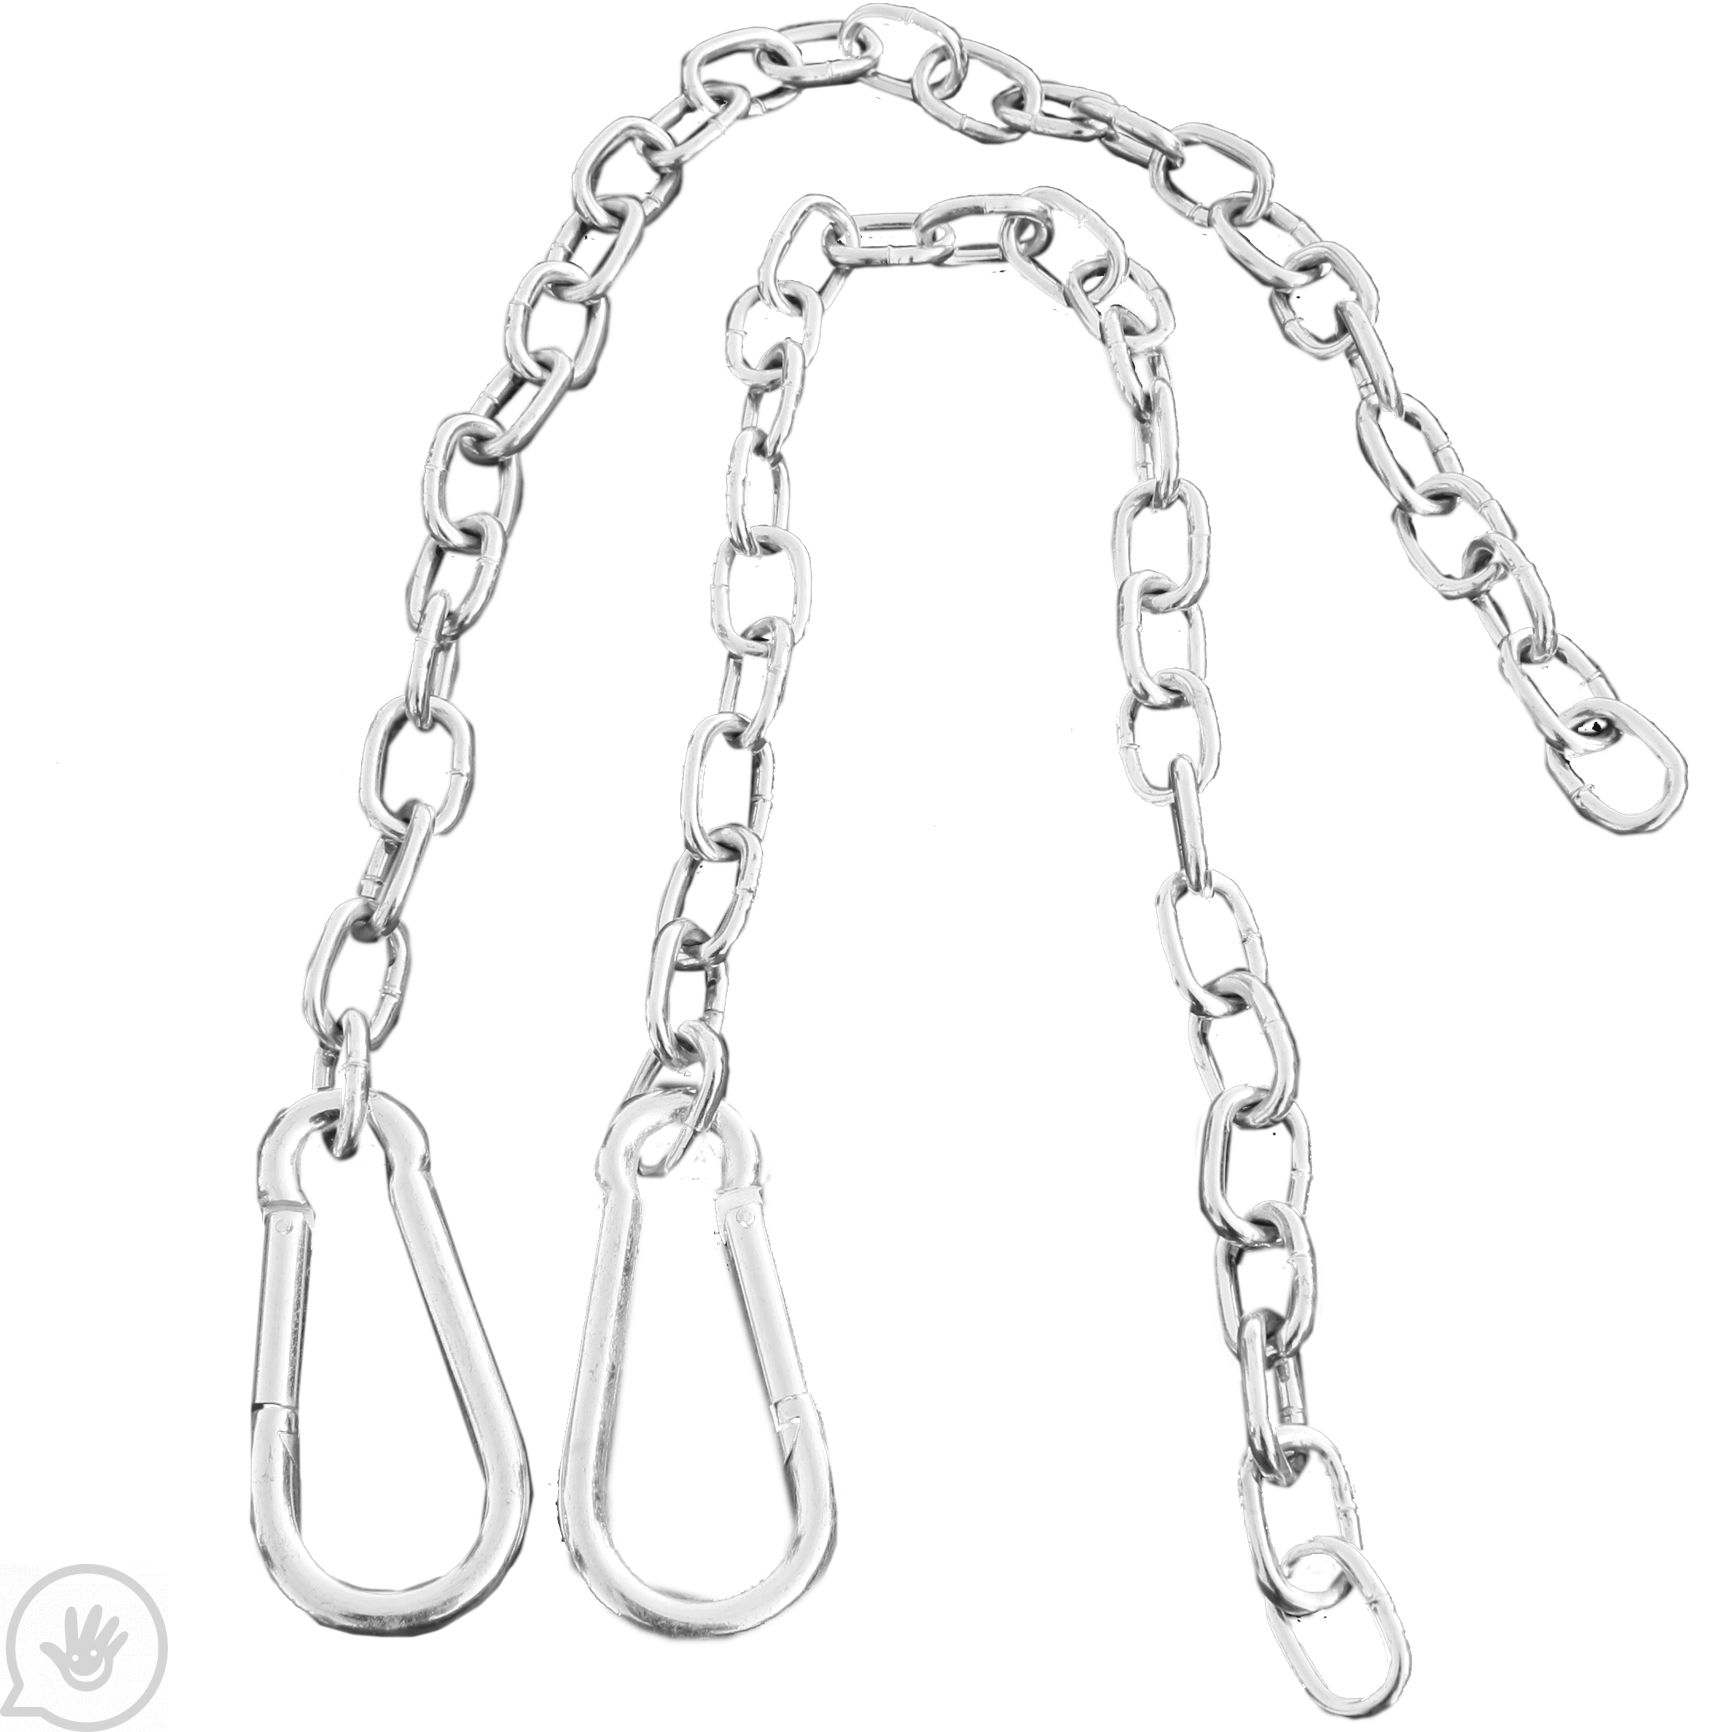 Height Adjustable Swing Chain Hardware at Fun and Function